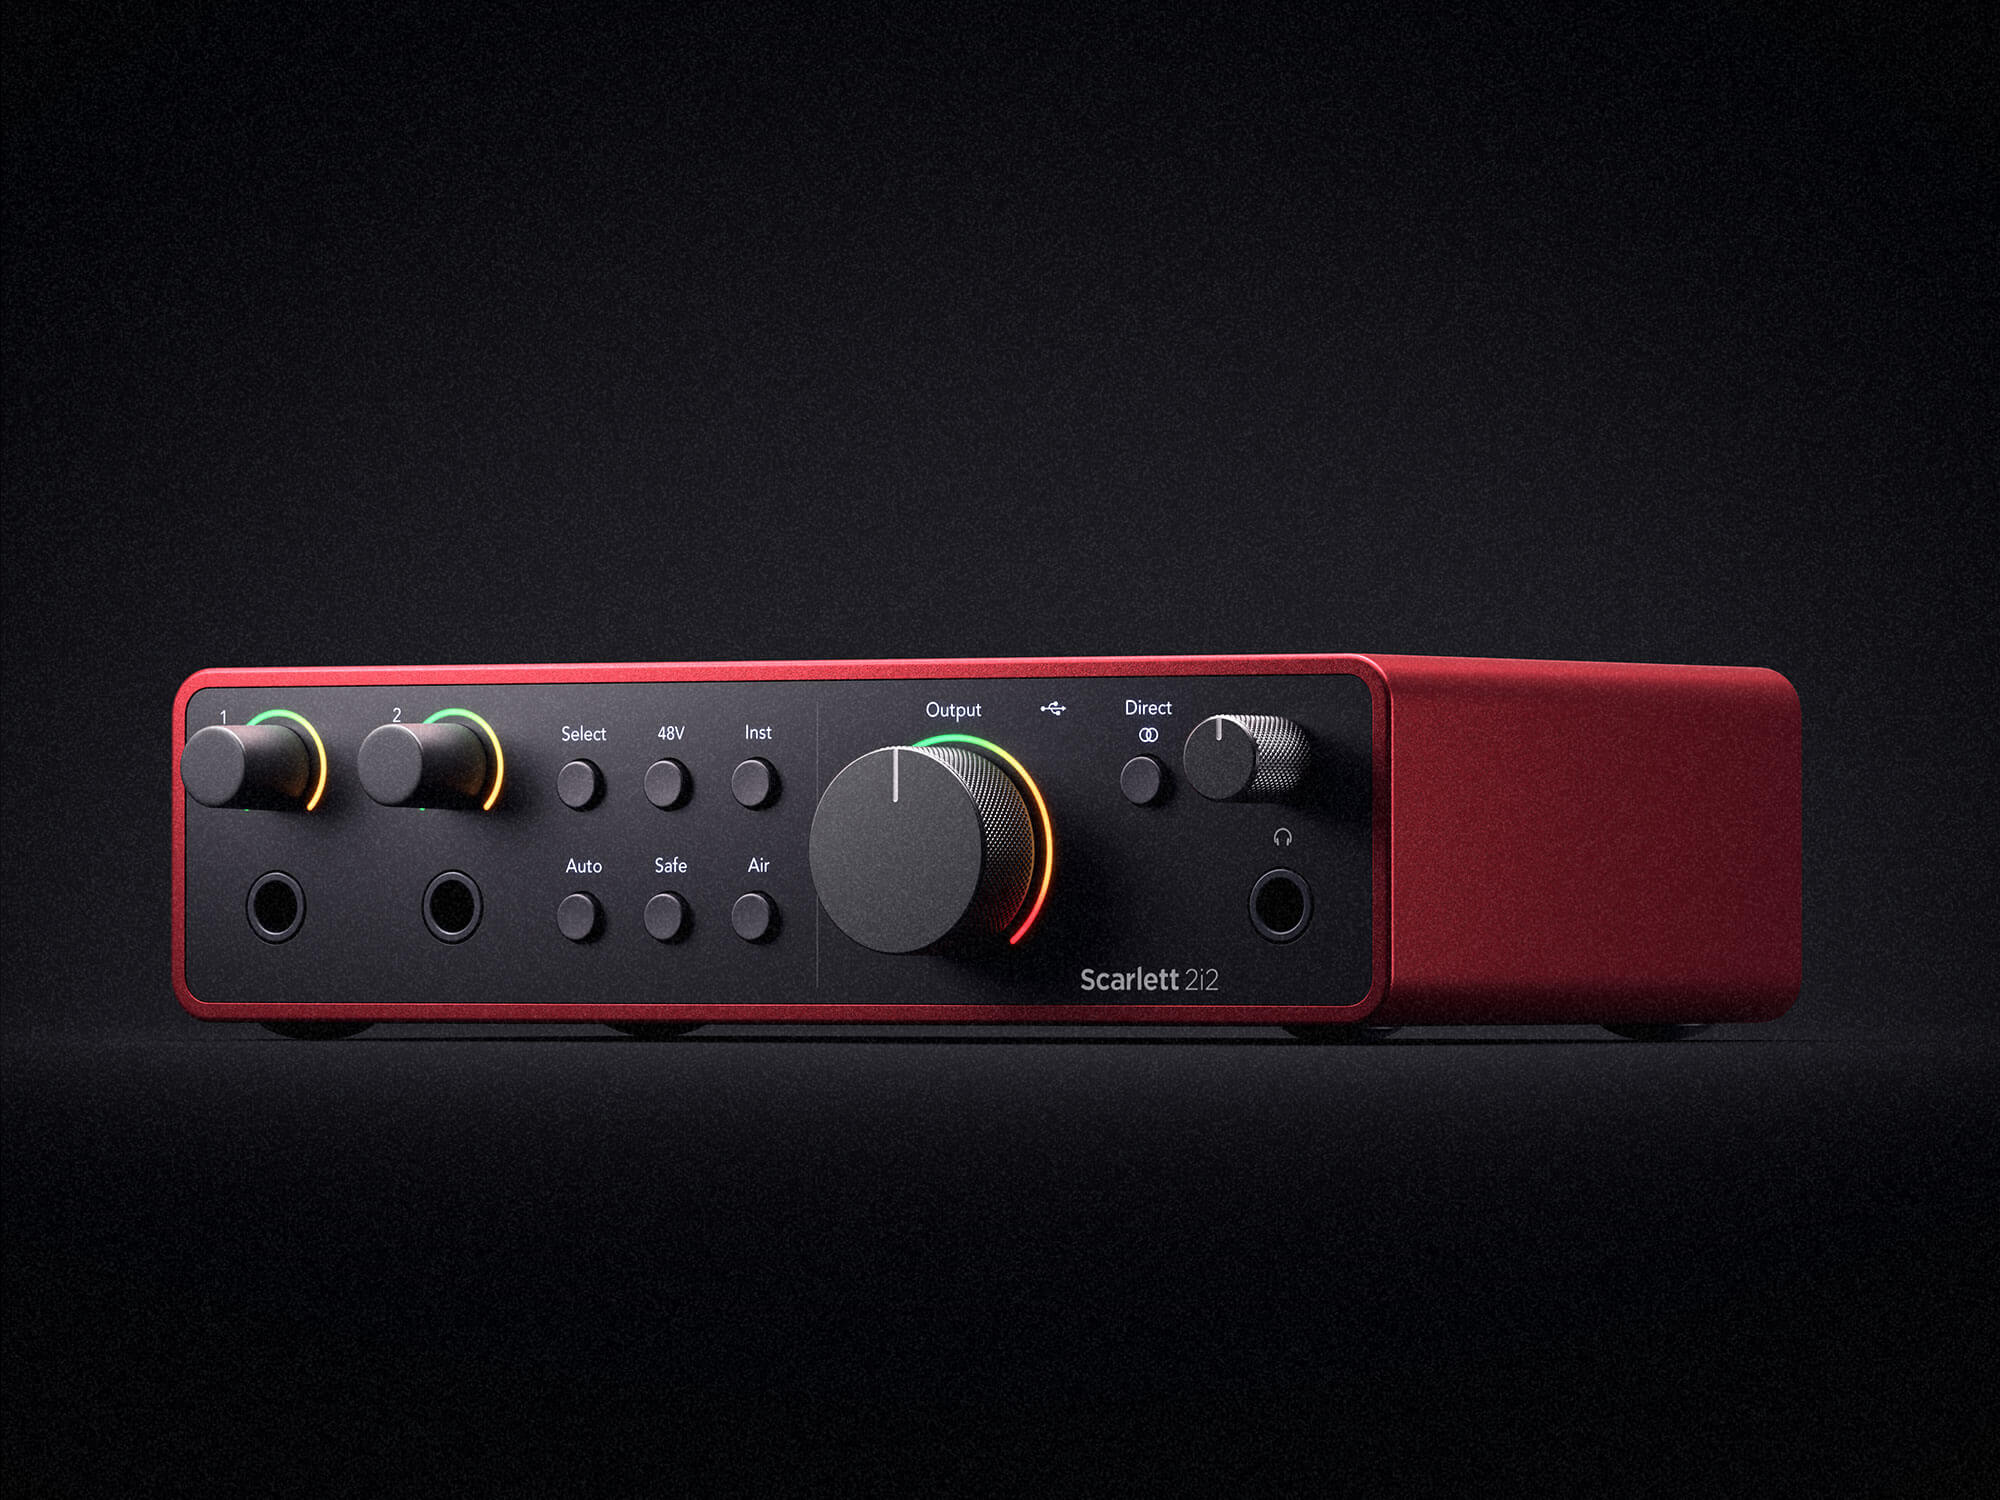 Focusrite Scarlett 2i2 4th Gen is ideal for recording artists with